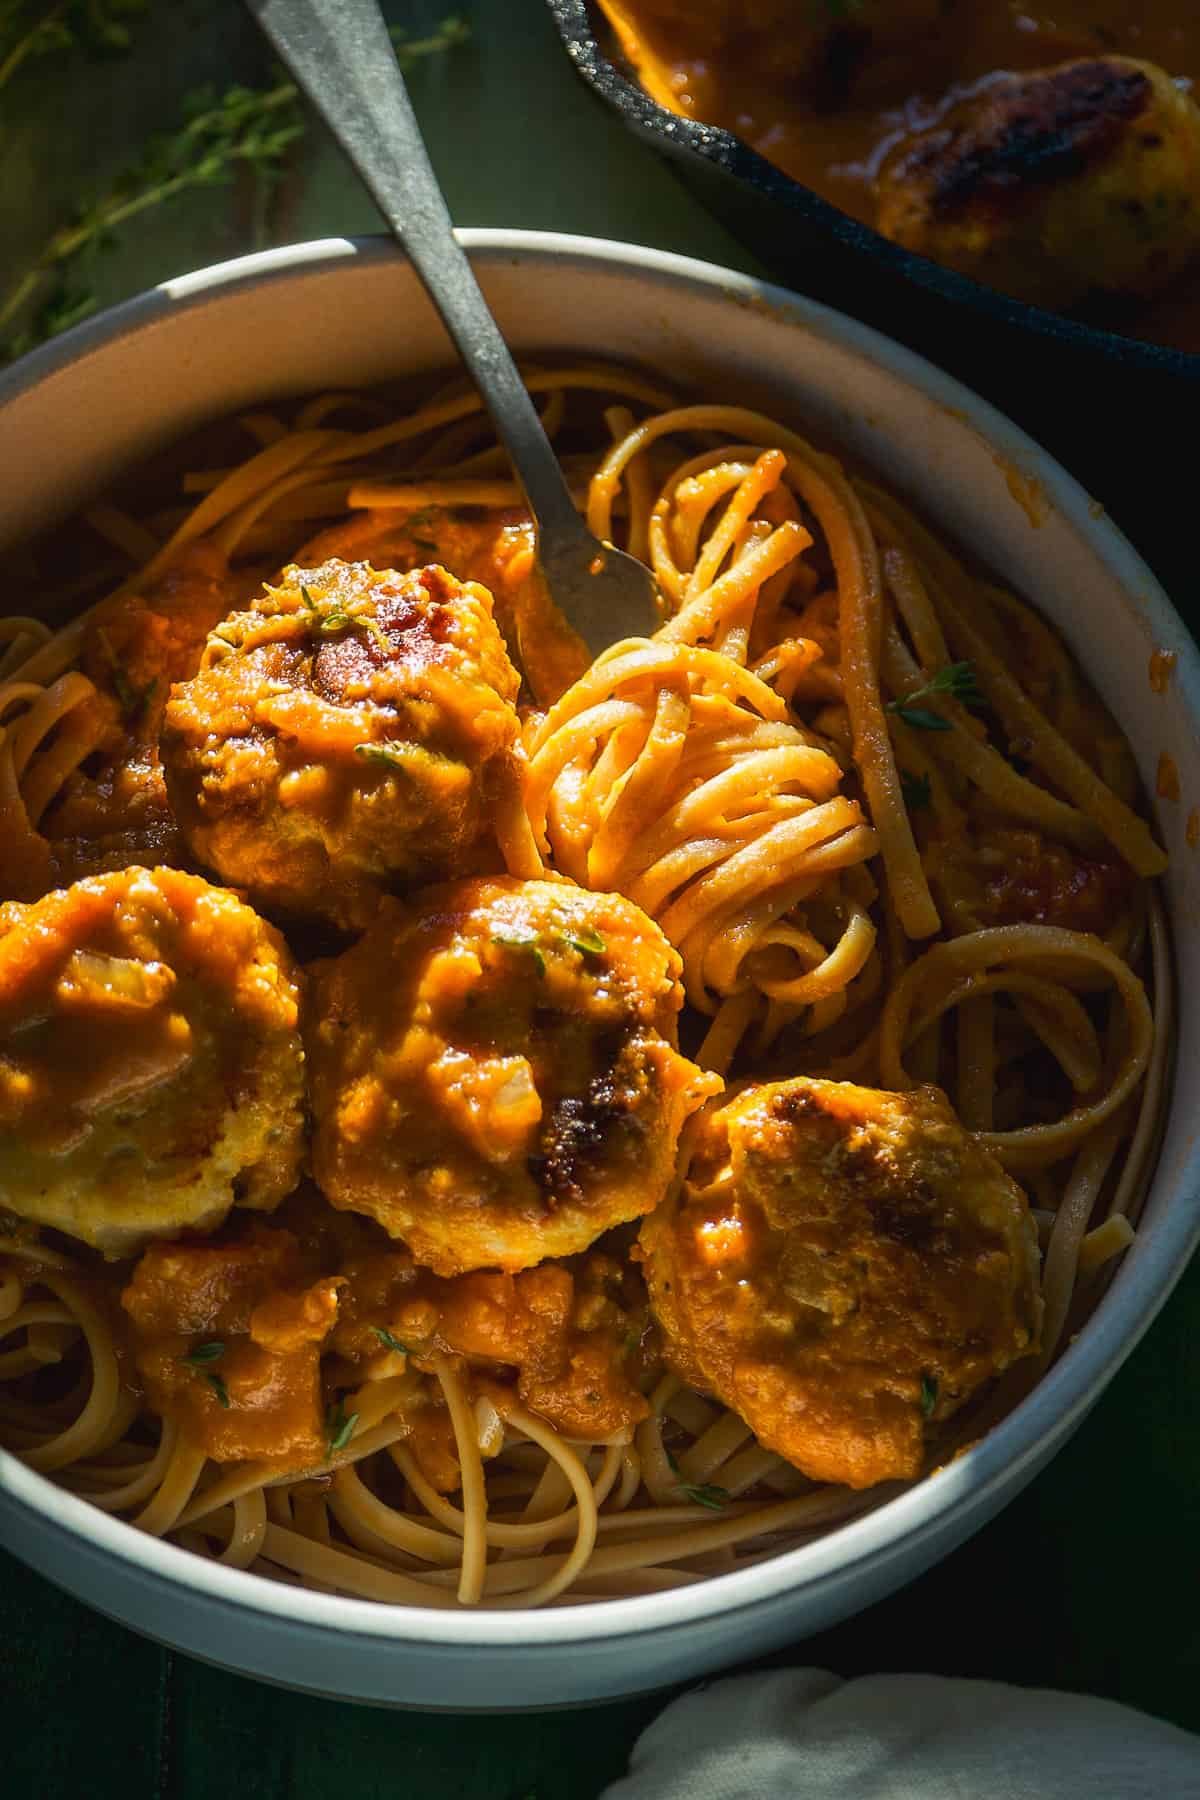 Tomato pumpkin pasta sauce with noodles and meatballs in a dish.